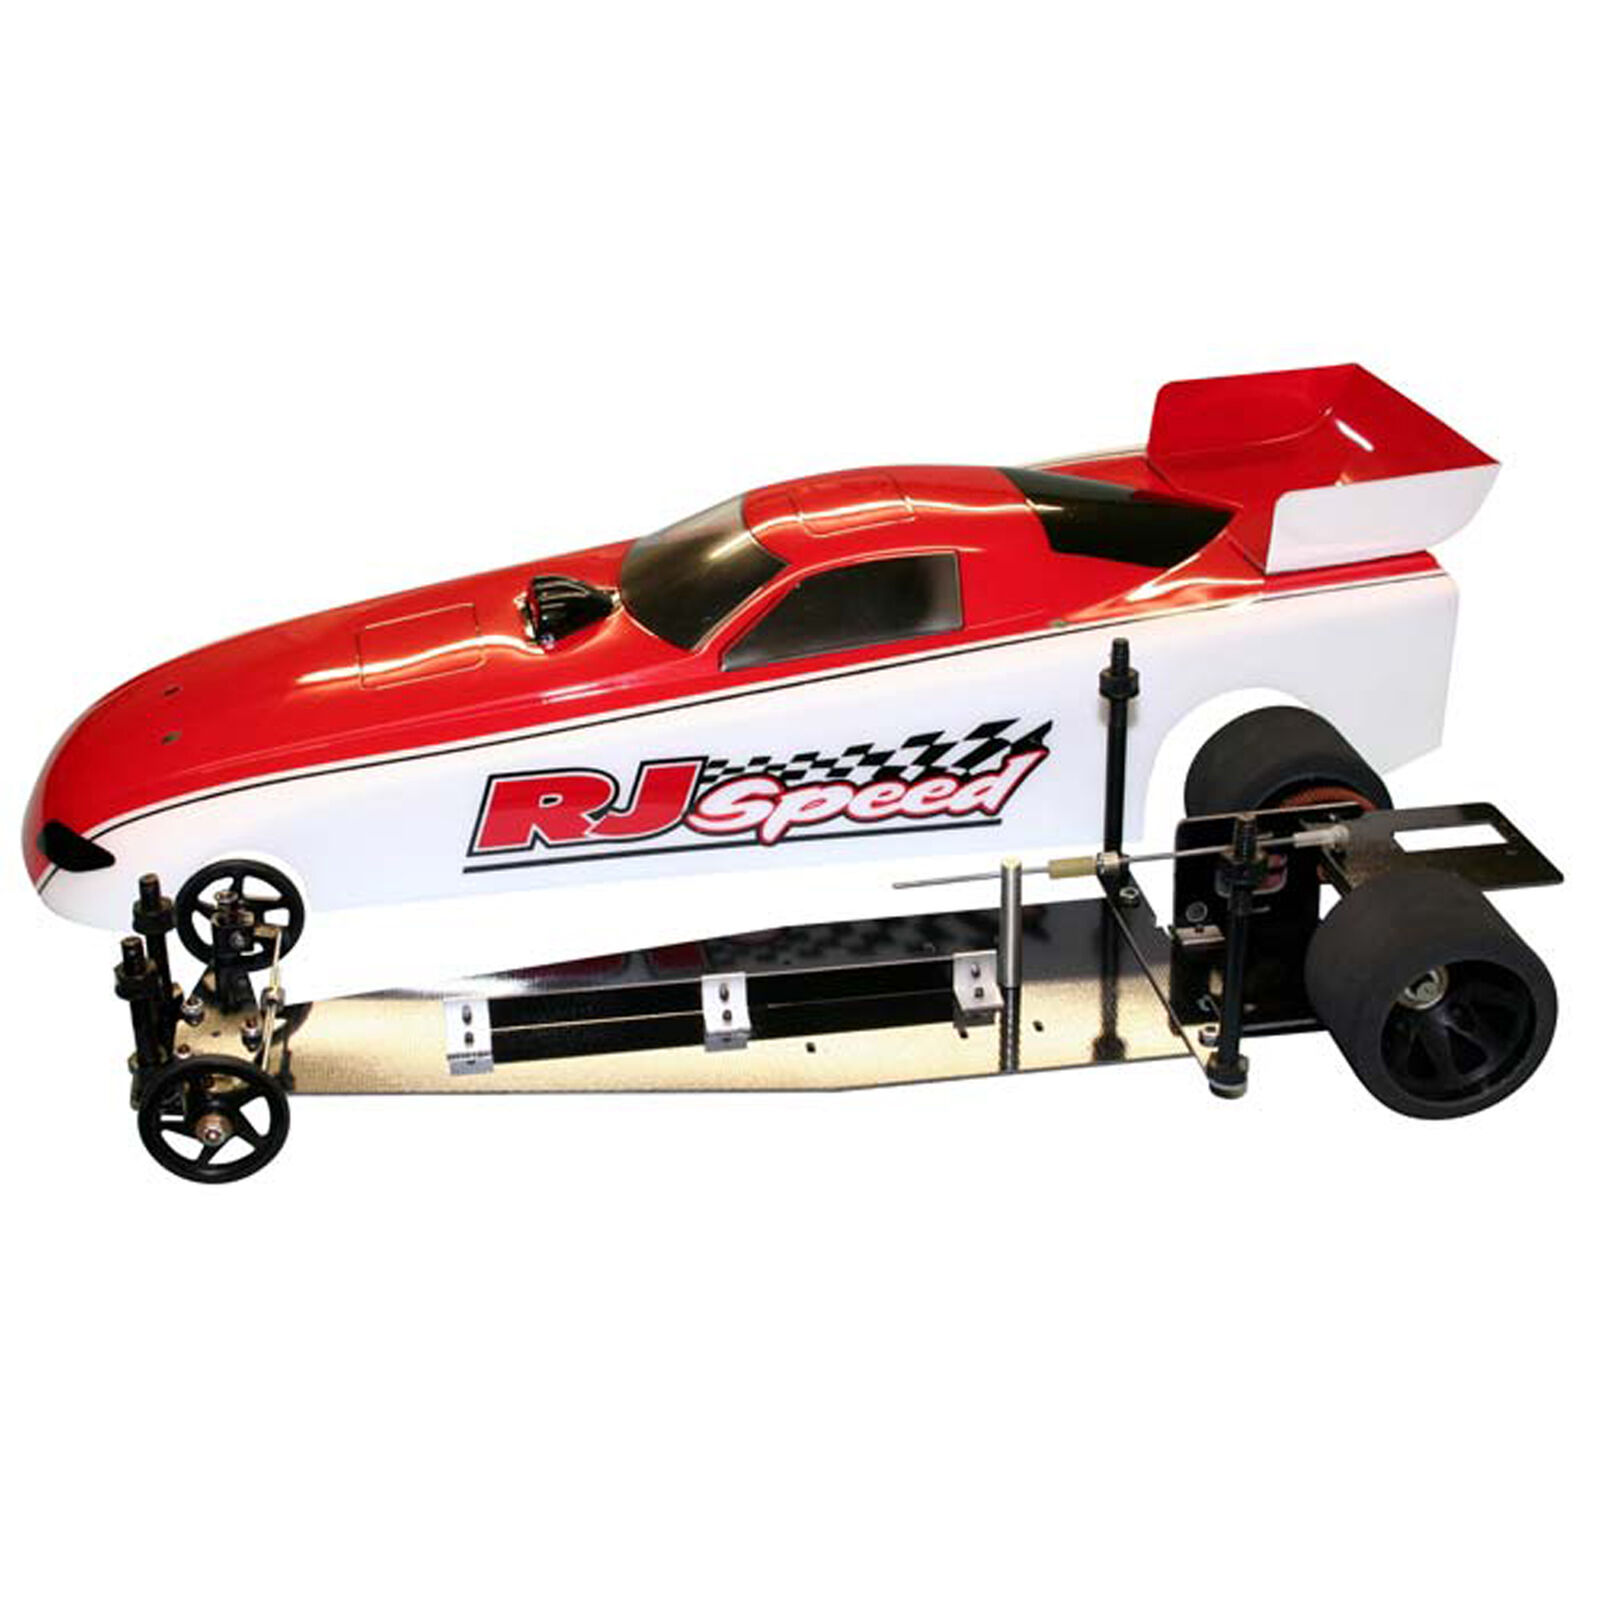 1/10 Electric Funny Car 2WD Dragster Kit, 13"